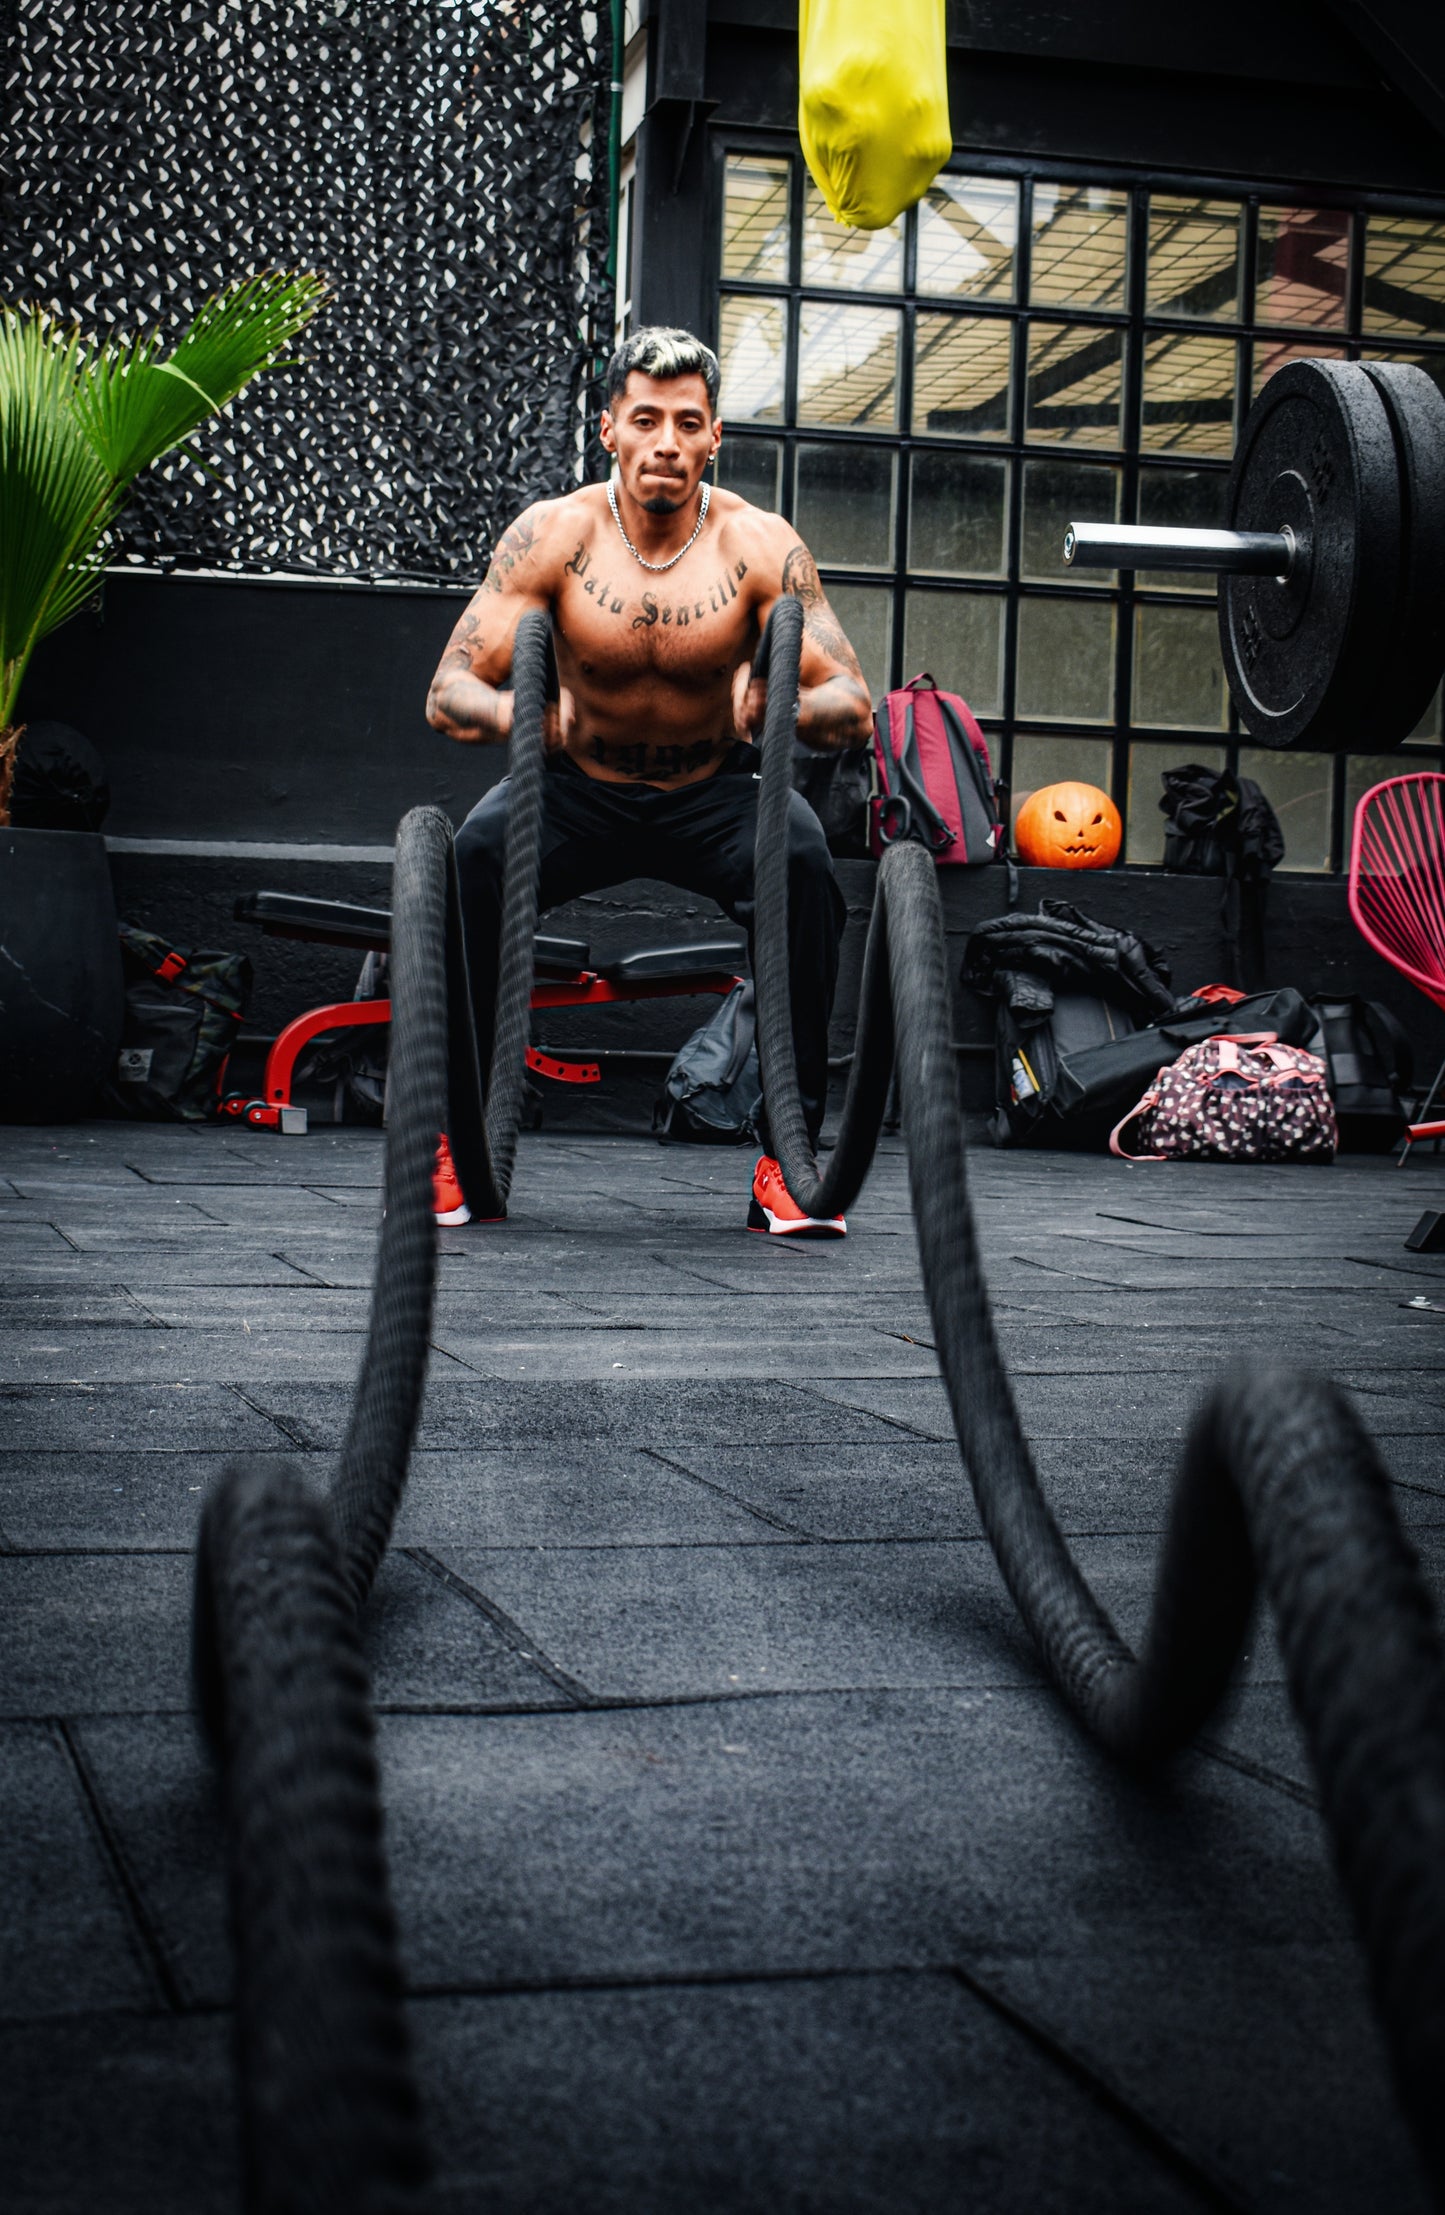 Personal Trainer Bundle - Includes Battle Rope, Jump Rope and Utility Rope